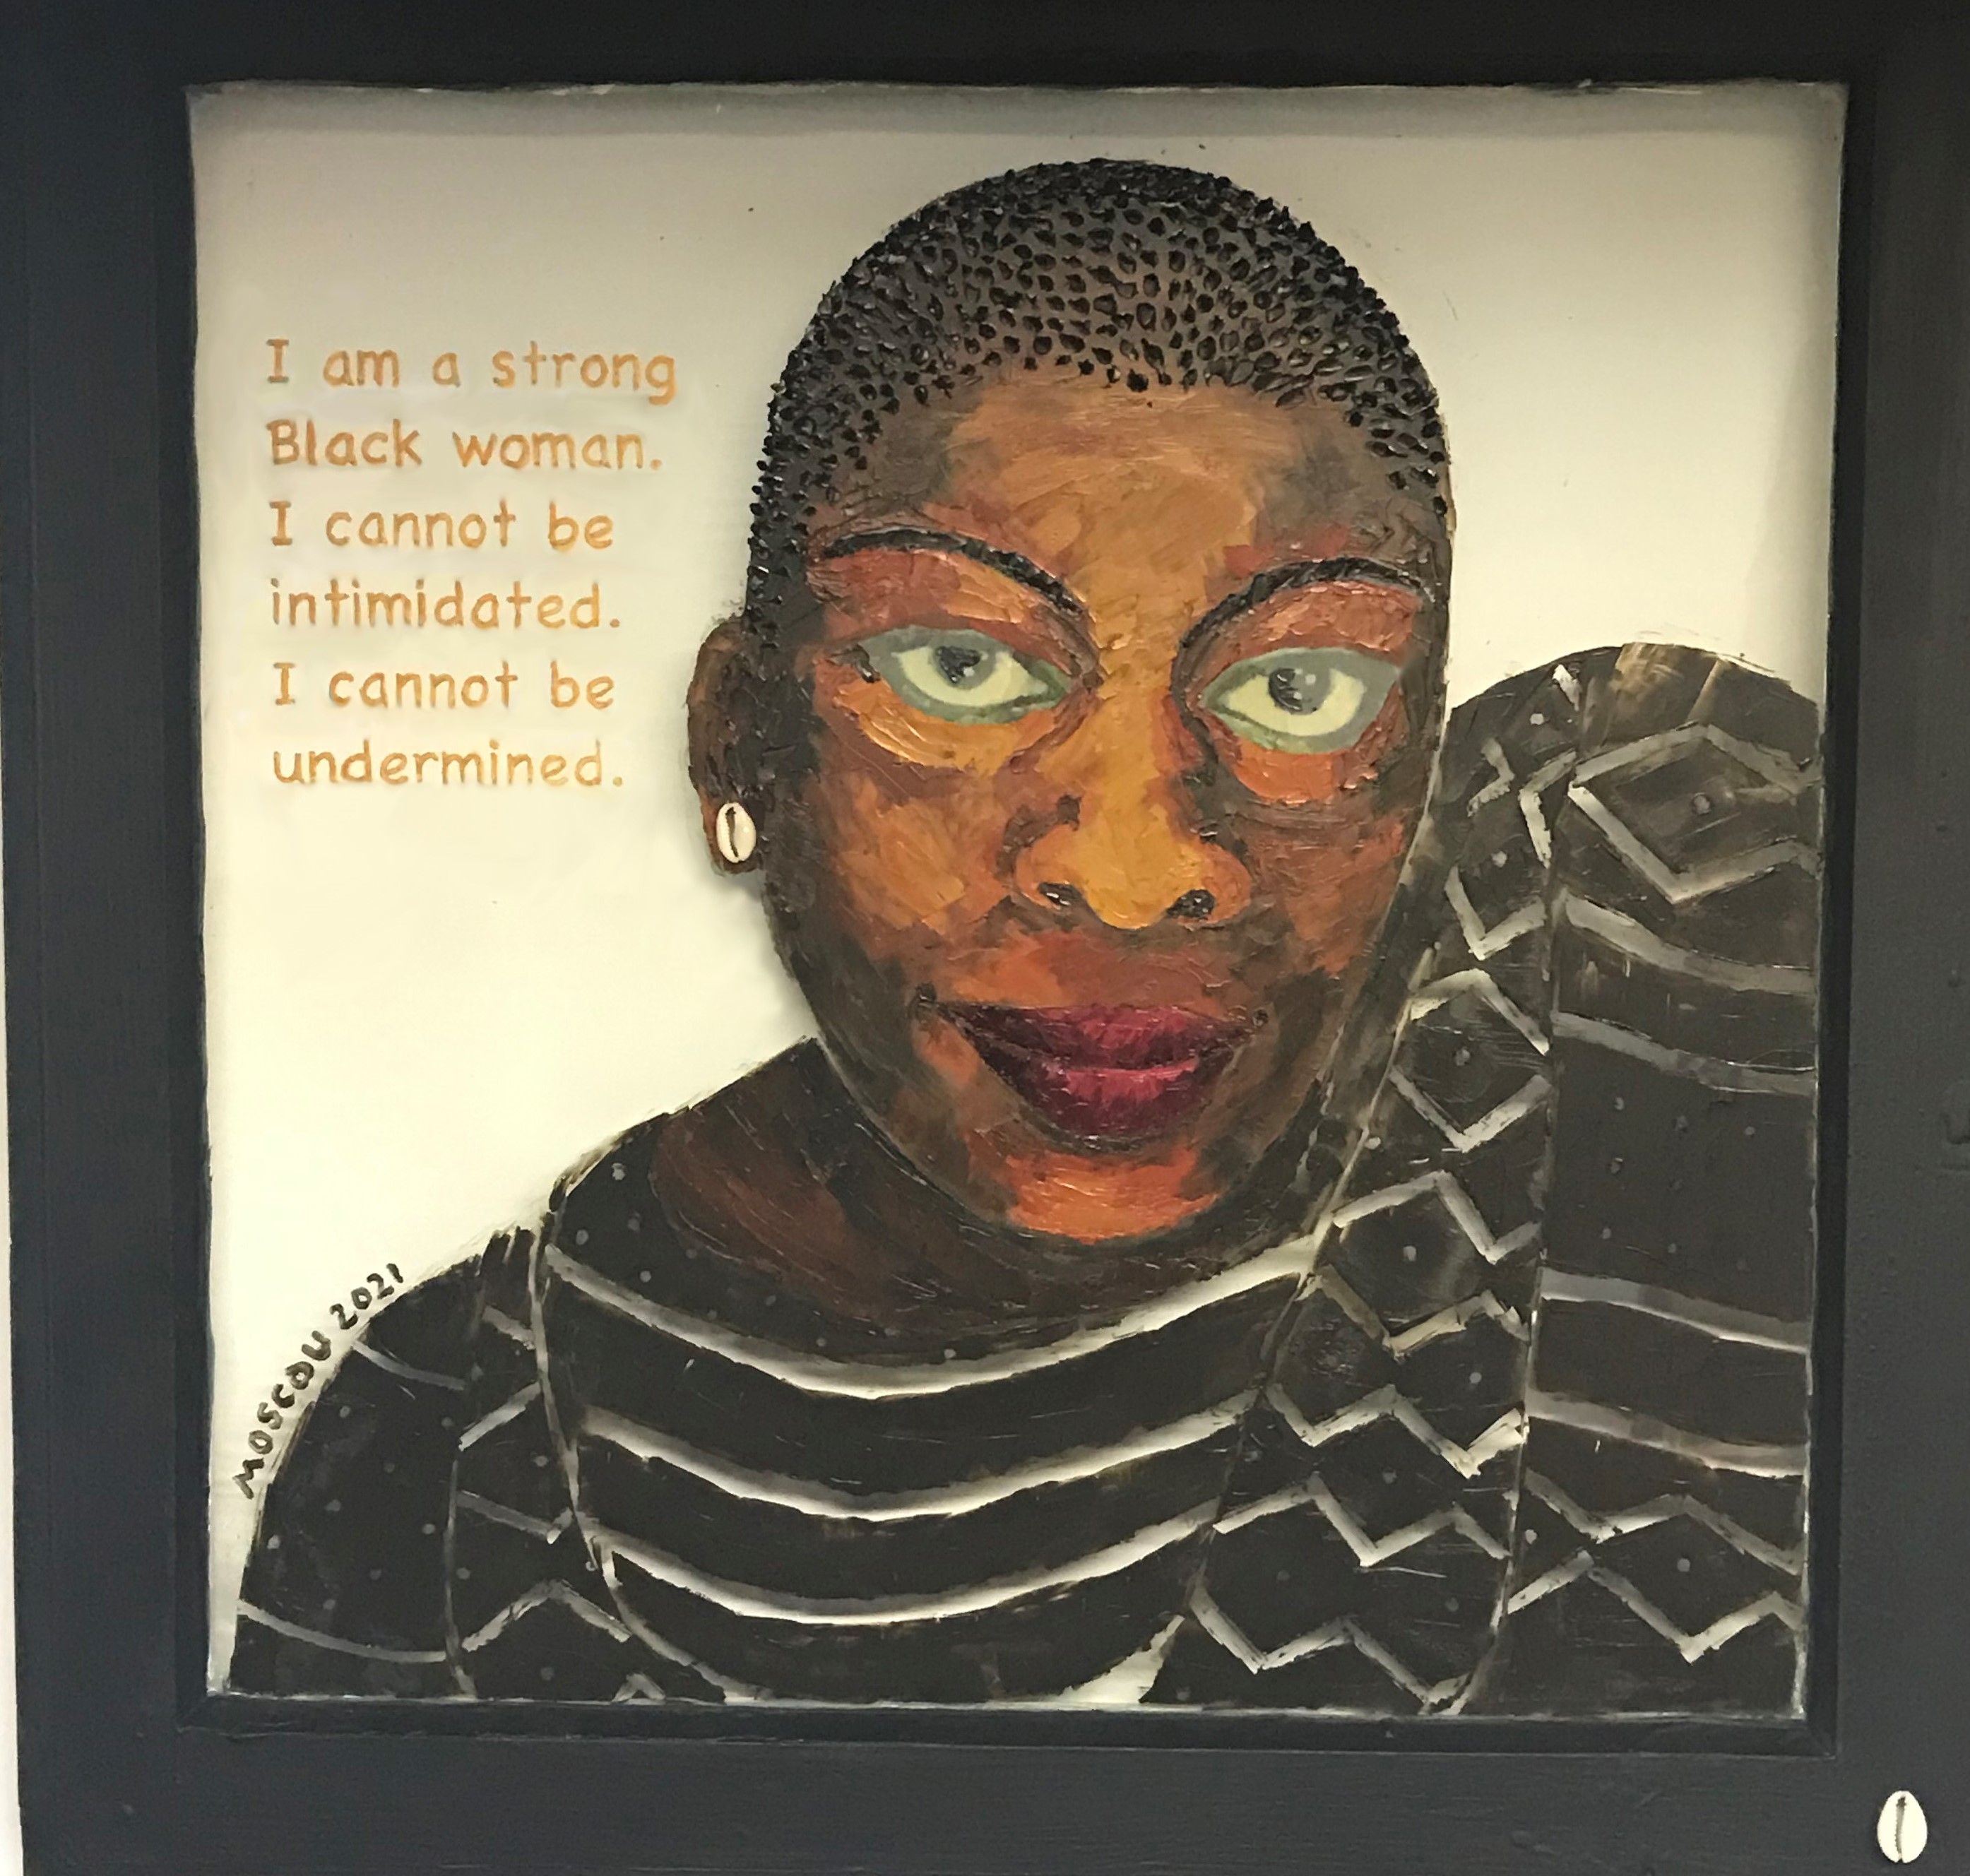 Strong Black Woman #1 is a mixed media work by artist Kathy Moscou (wood, glass, oil and cowrie shell). Size: 24” x 24”